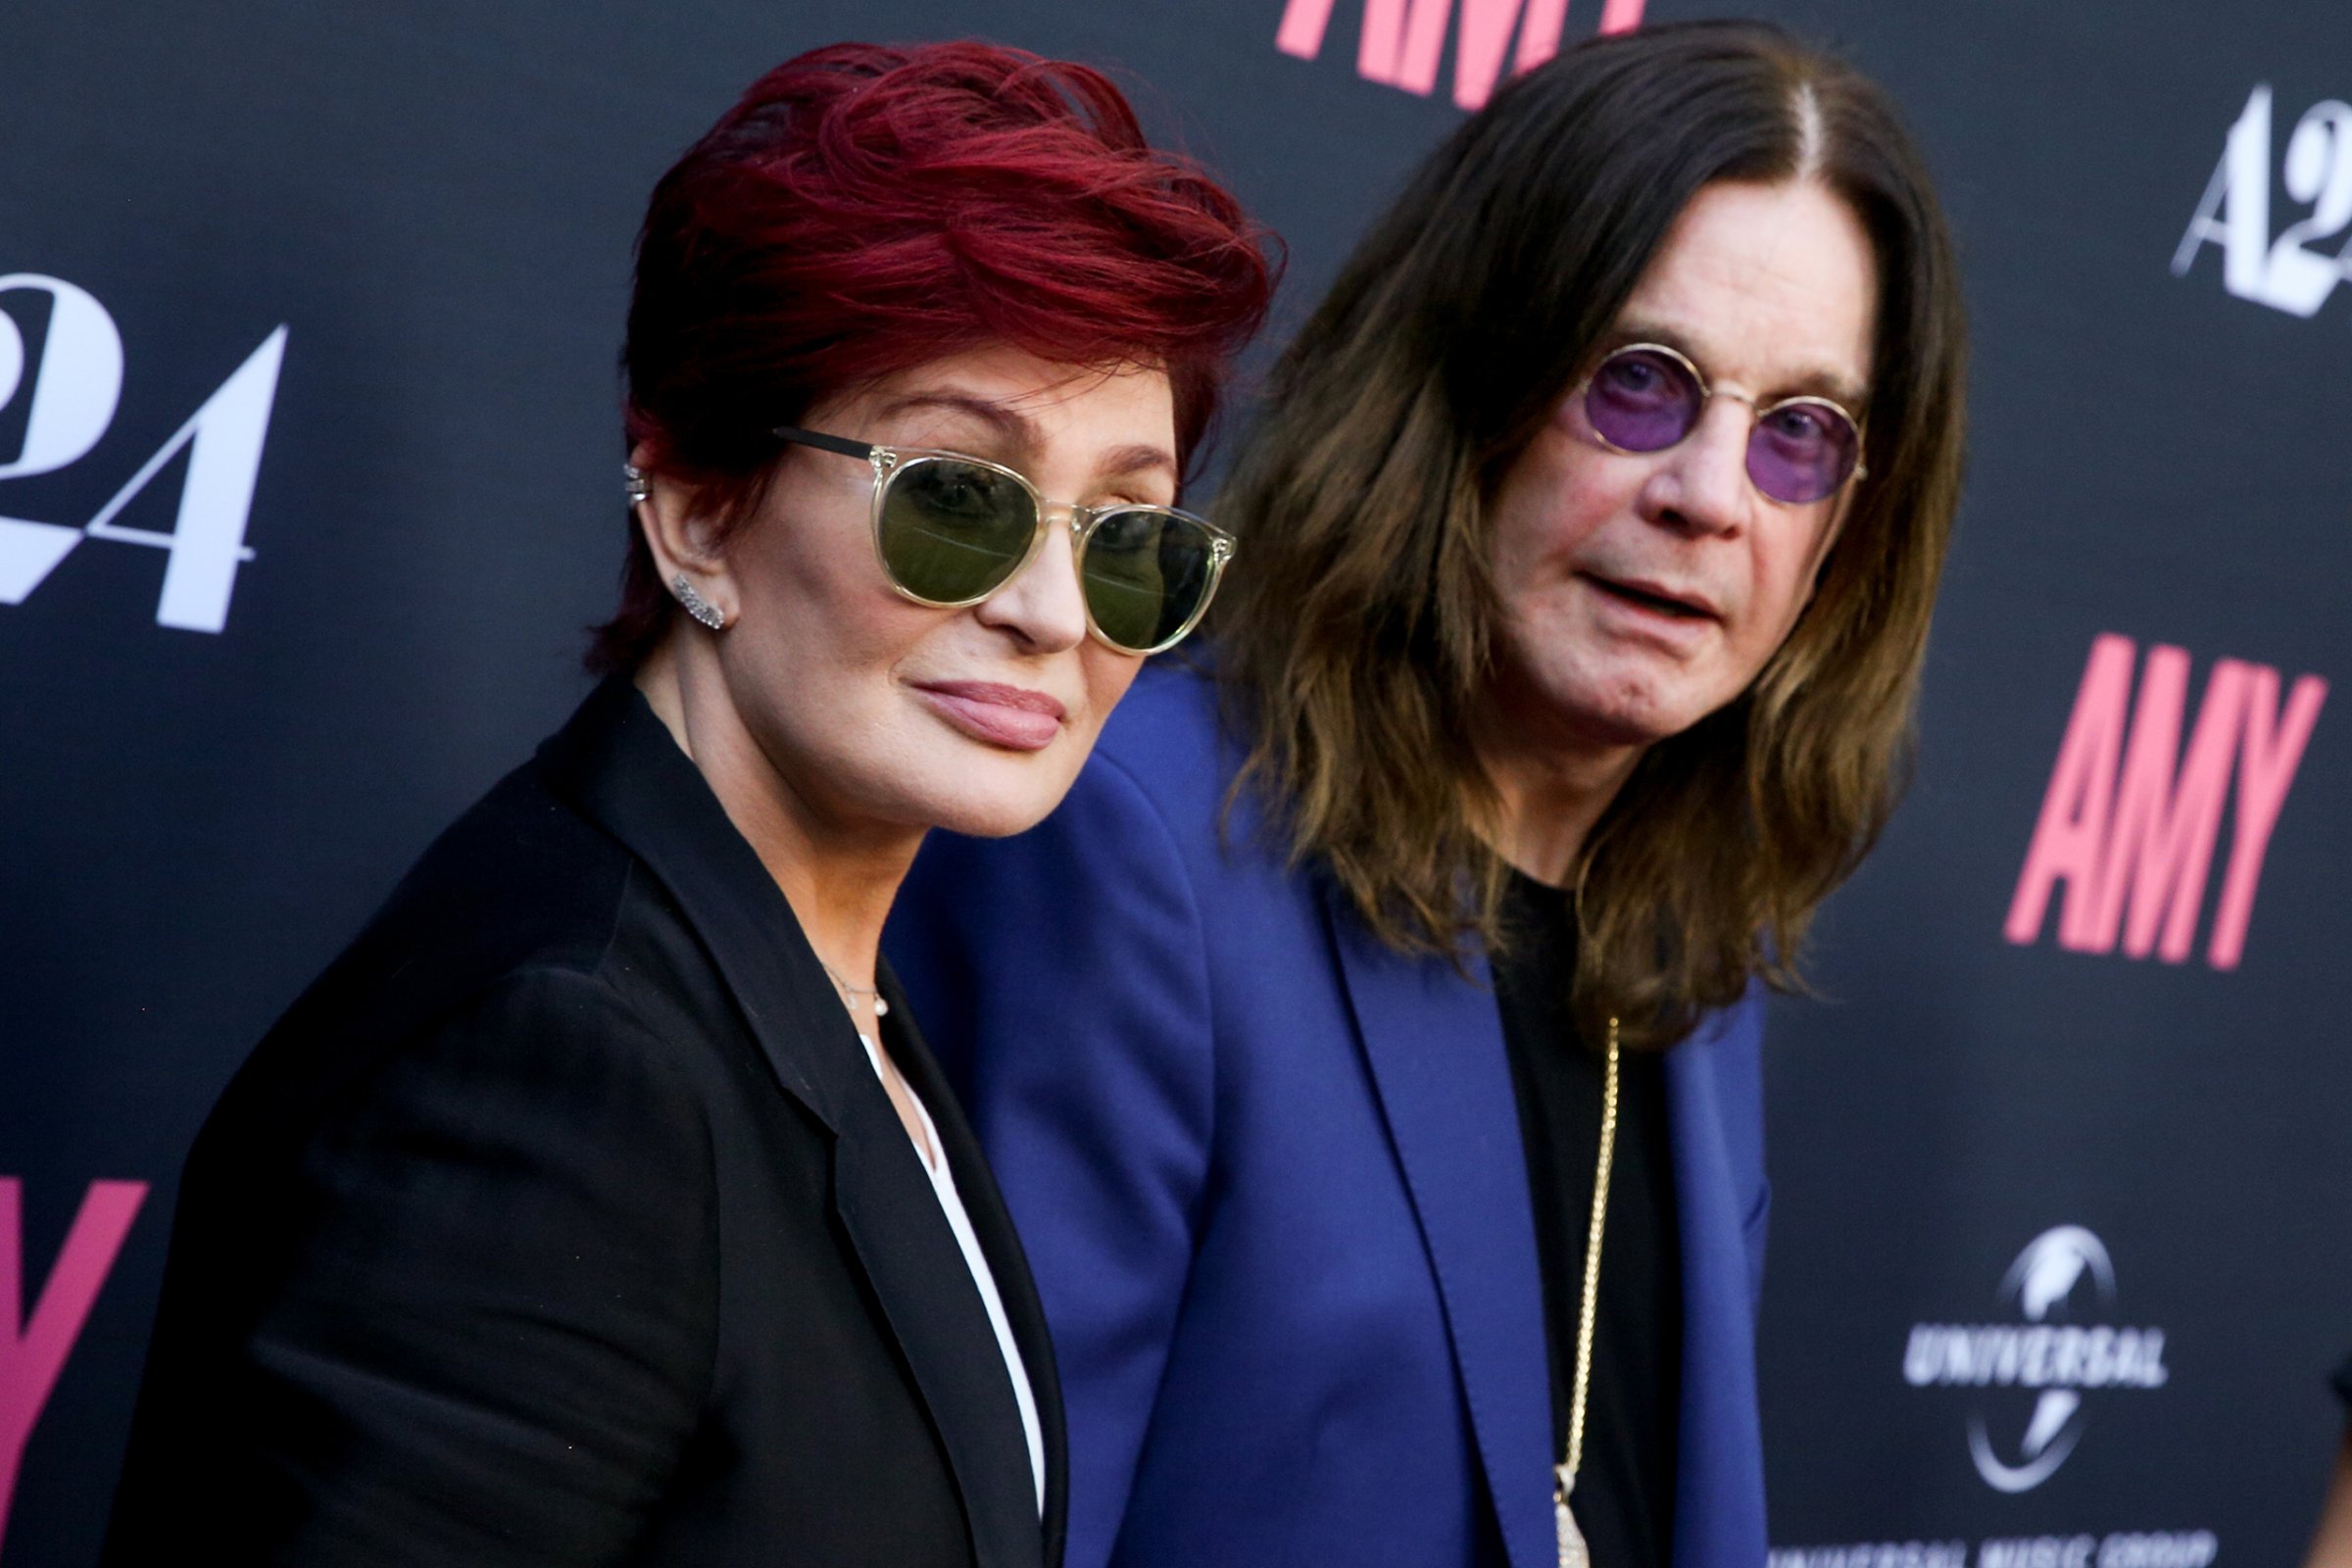 Sharon Osbourne, left, and Ozzy Osbourne arrive at the LA Premiere of "Amy" in Los Angeles, June 25, 2015.